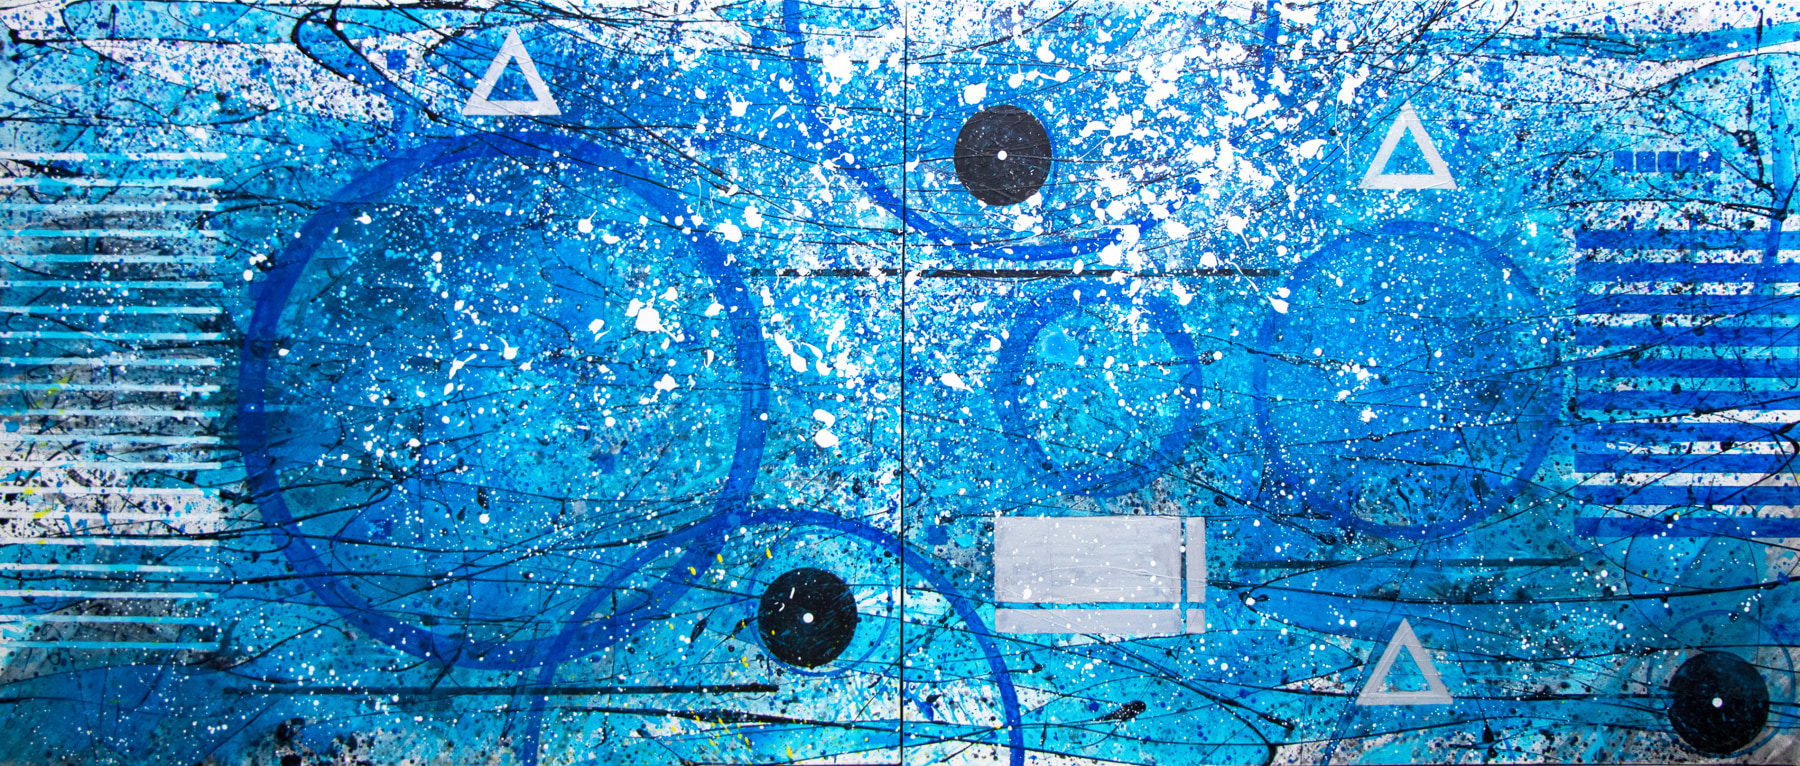 J. Steven Manolis, Splash (concentric) painting, 2020, 60 x 144 inches, Acrylic and Latex painting on Canvas, Extra large Wall Art, Blue Abstract Art for sale at Manolis Projects Art Gallery, Miami, Fl